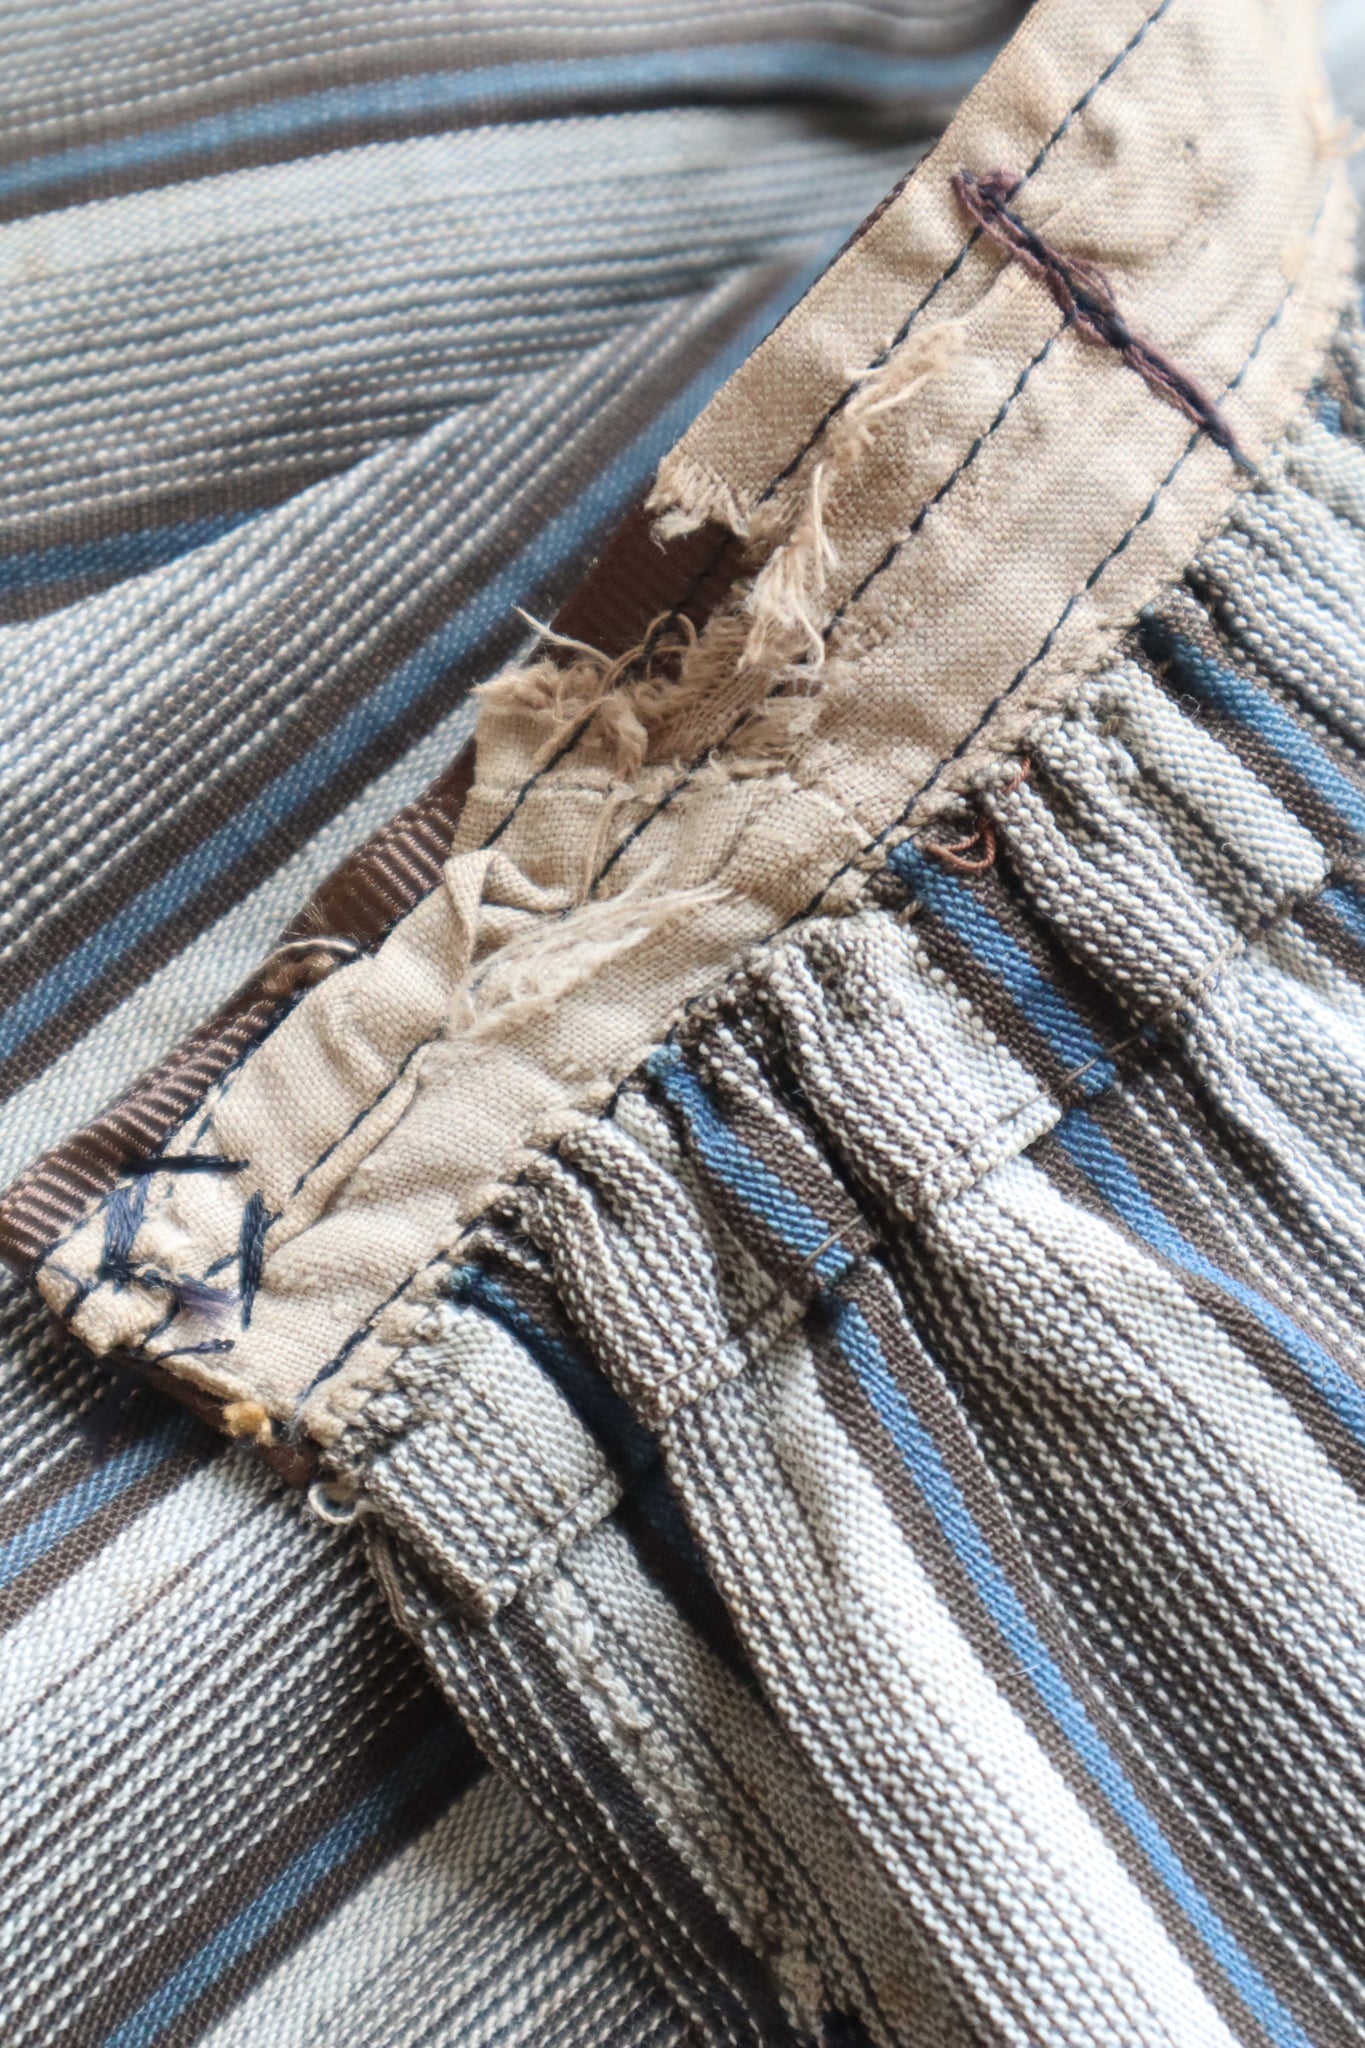 1900s Brown Striped Pleated Ruffle Skirt